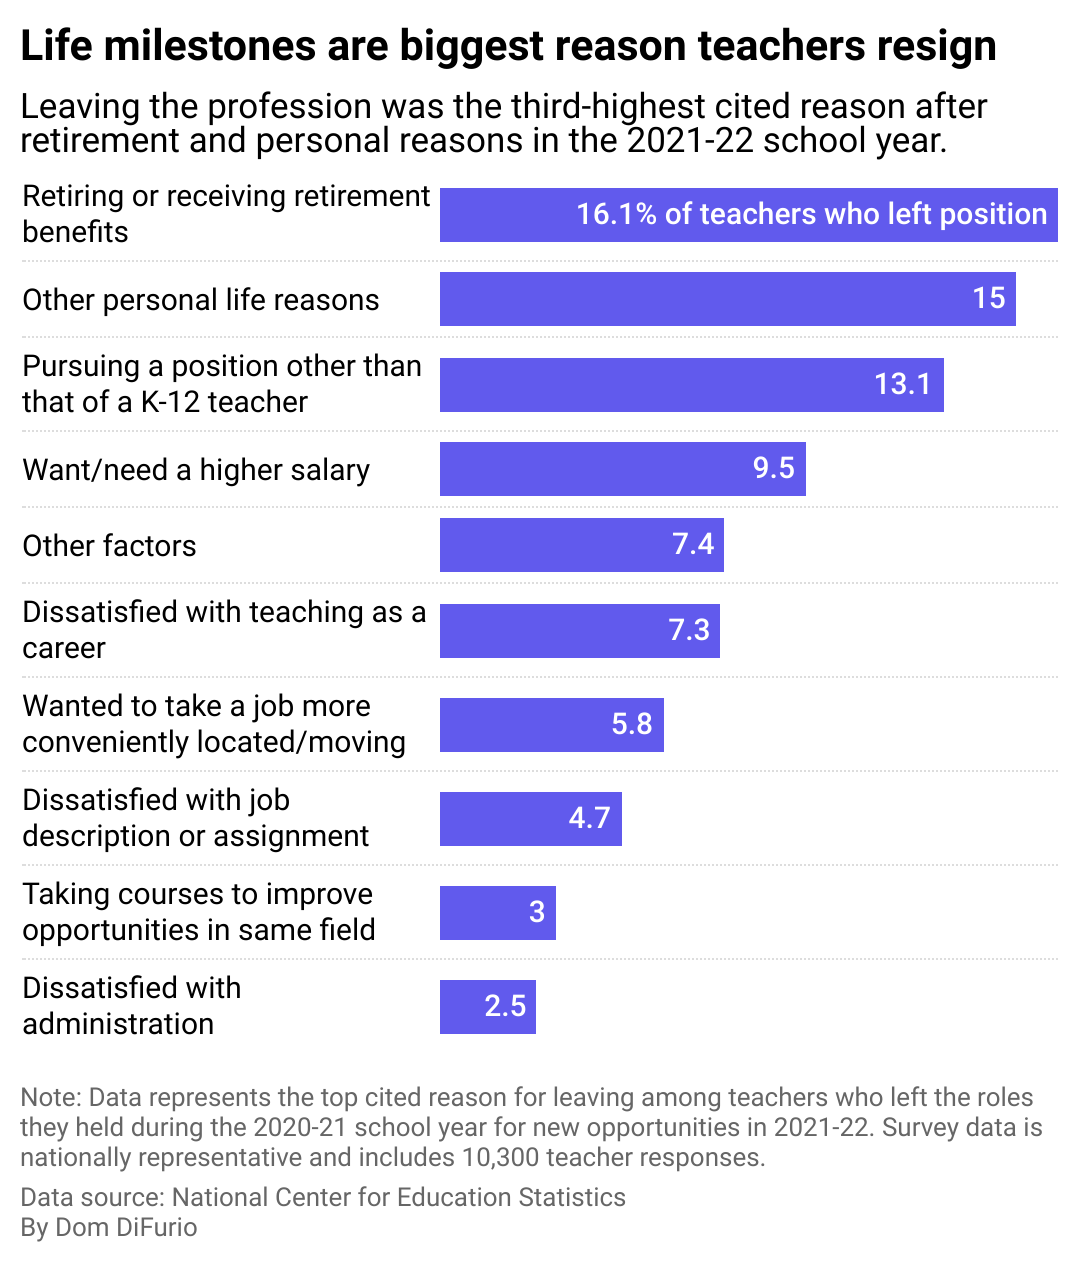 Bar chart showing most likely reasons teachers leave their job, with retirement cited as the number one reason and leaving the profession coming in third.